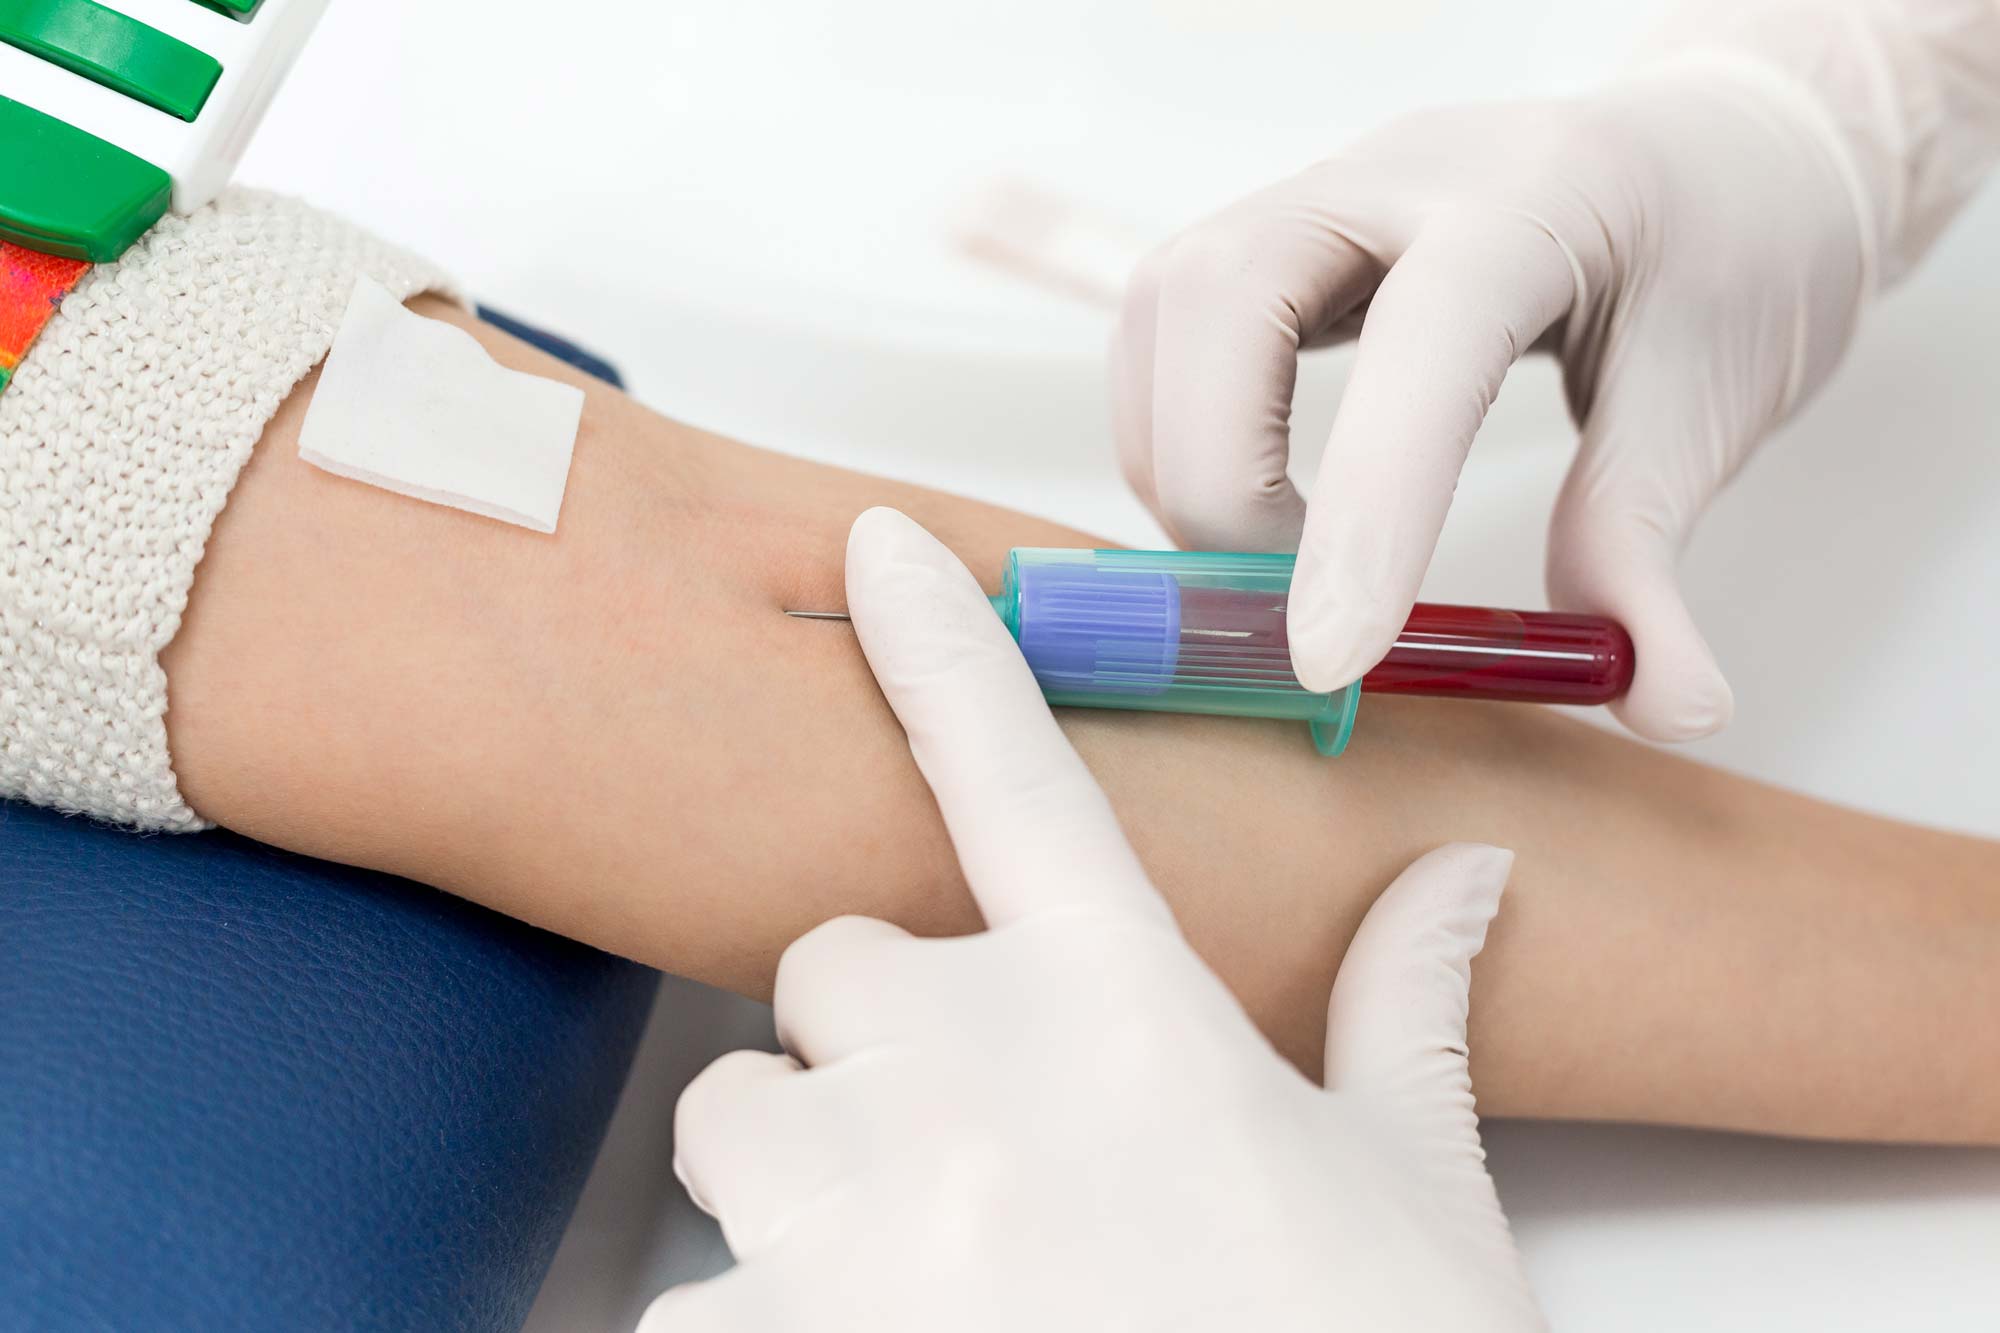 Can You Do Blood Test while Fasting?